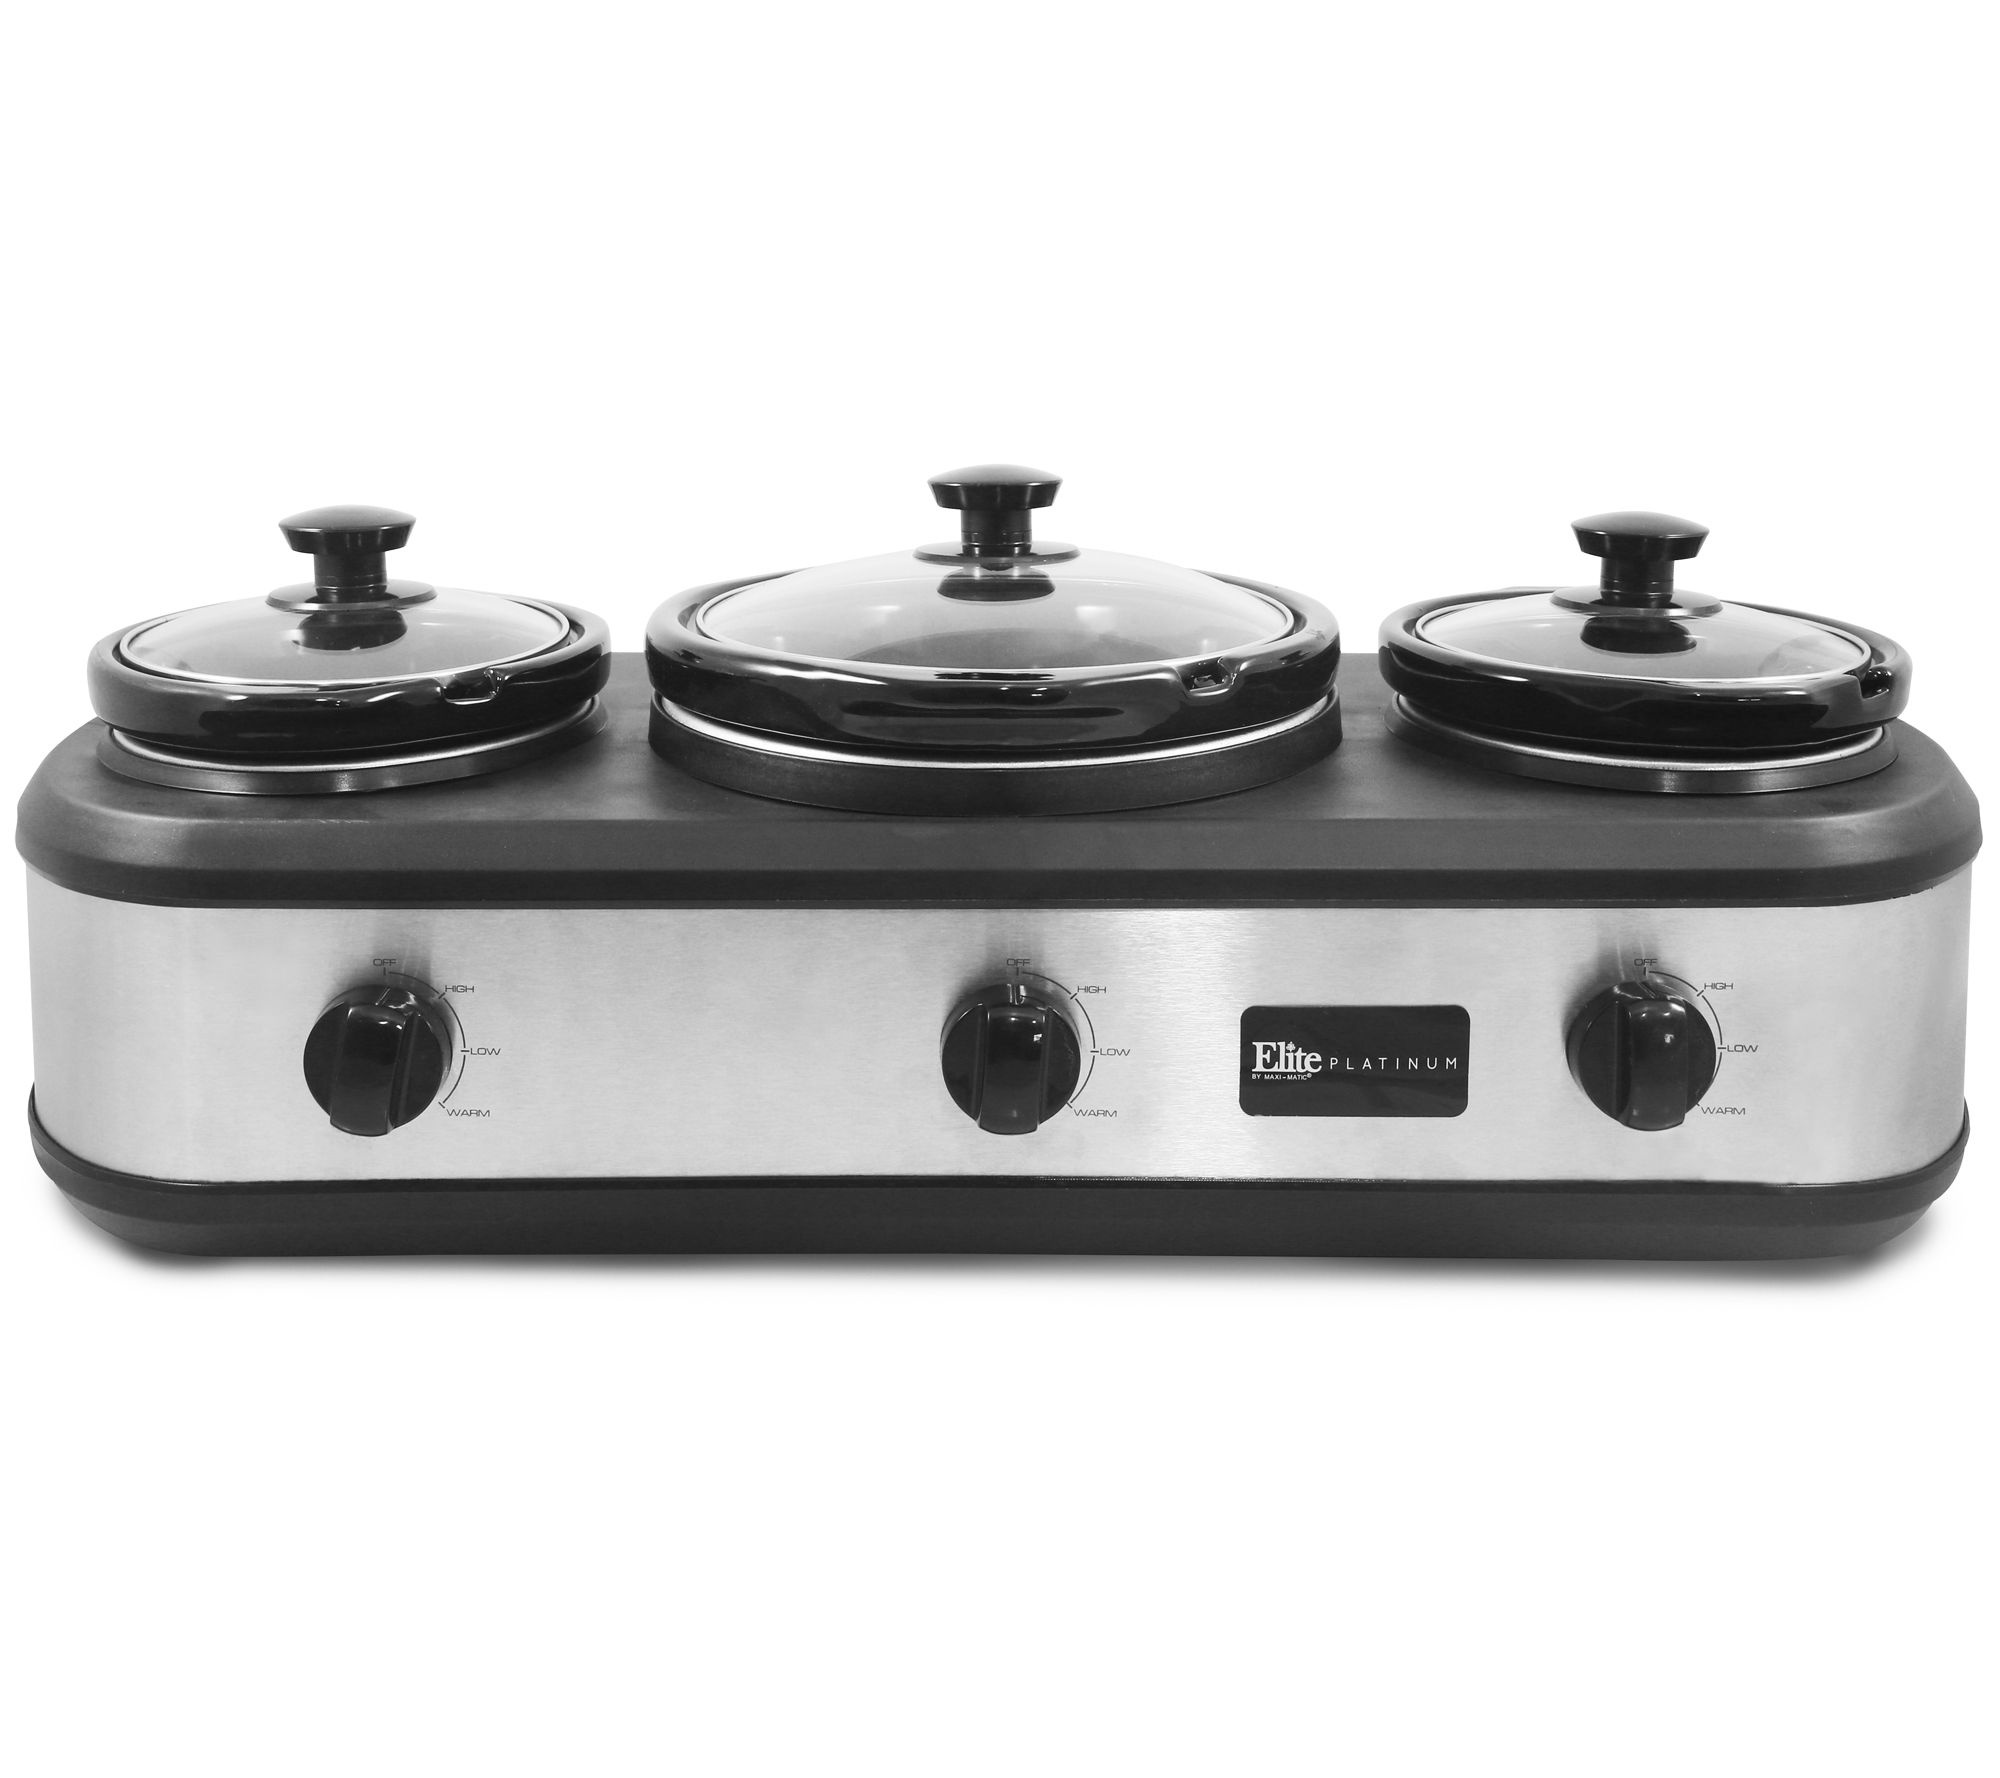 Courant 2.5 QT Double Slow Cooker - Stainless Steel